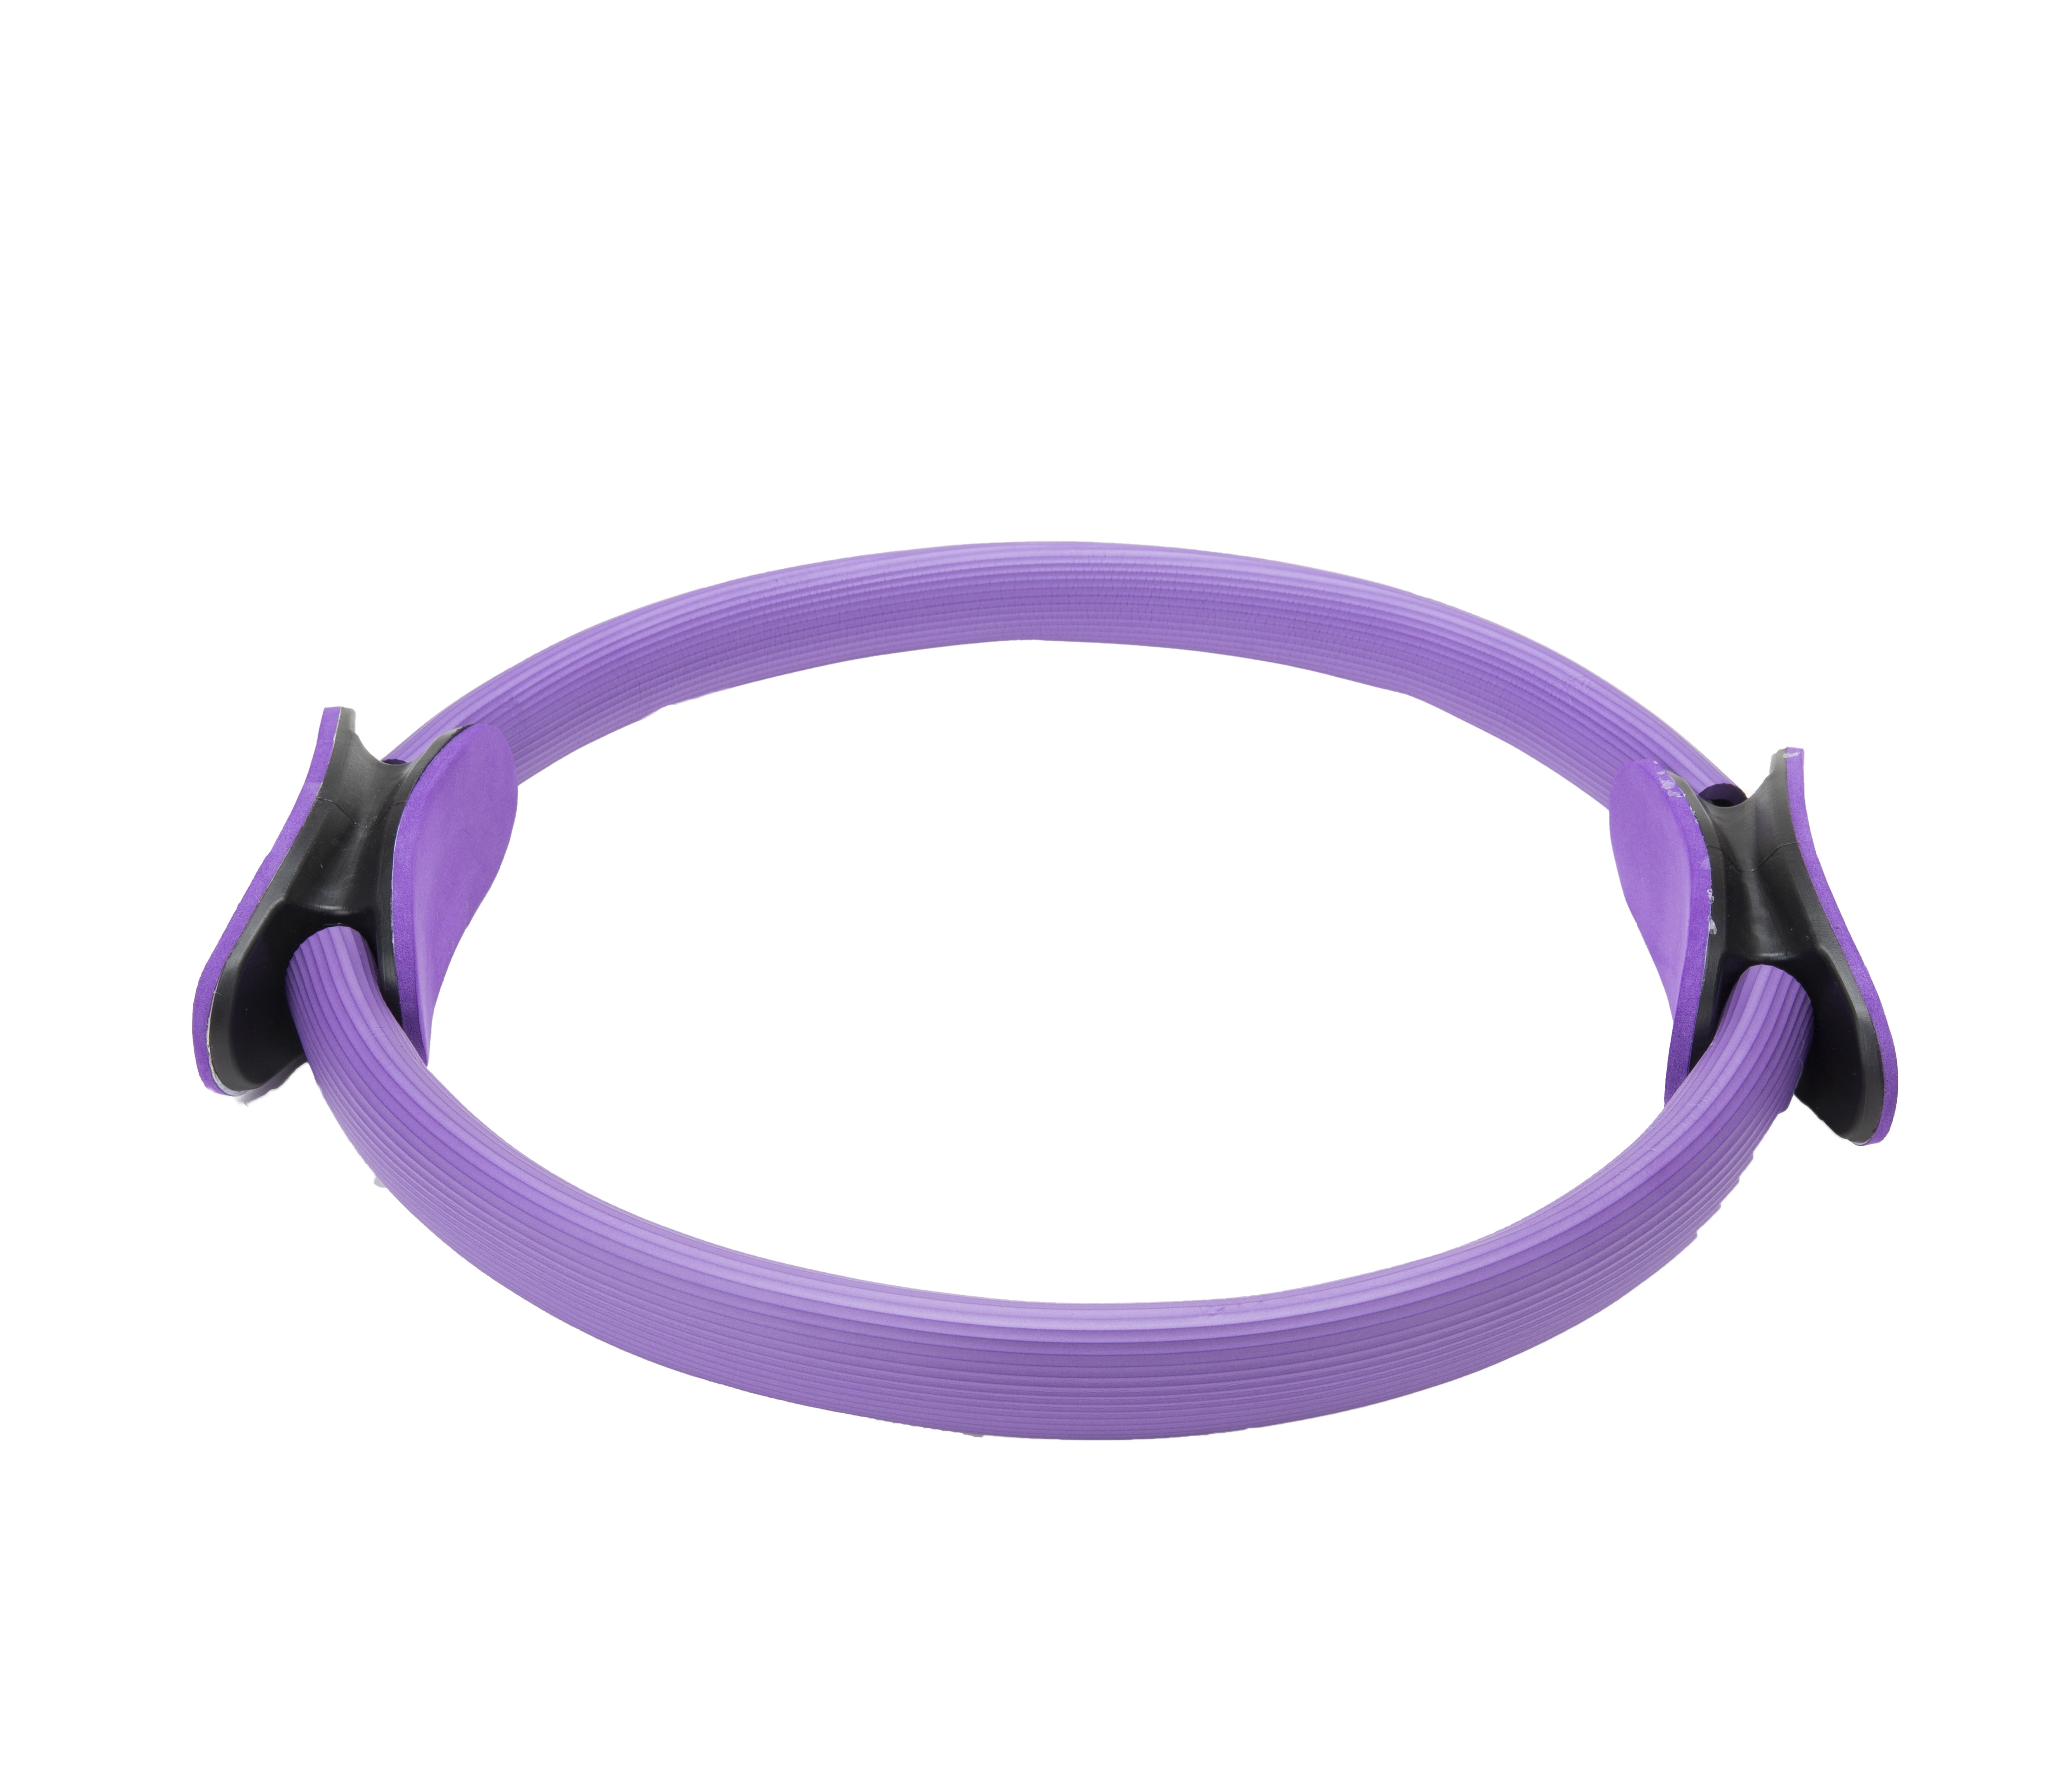 Aeromat Pilates Ring 14inch for sale online 